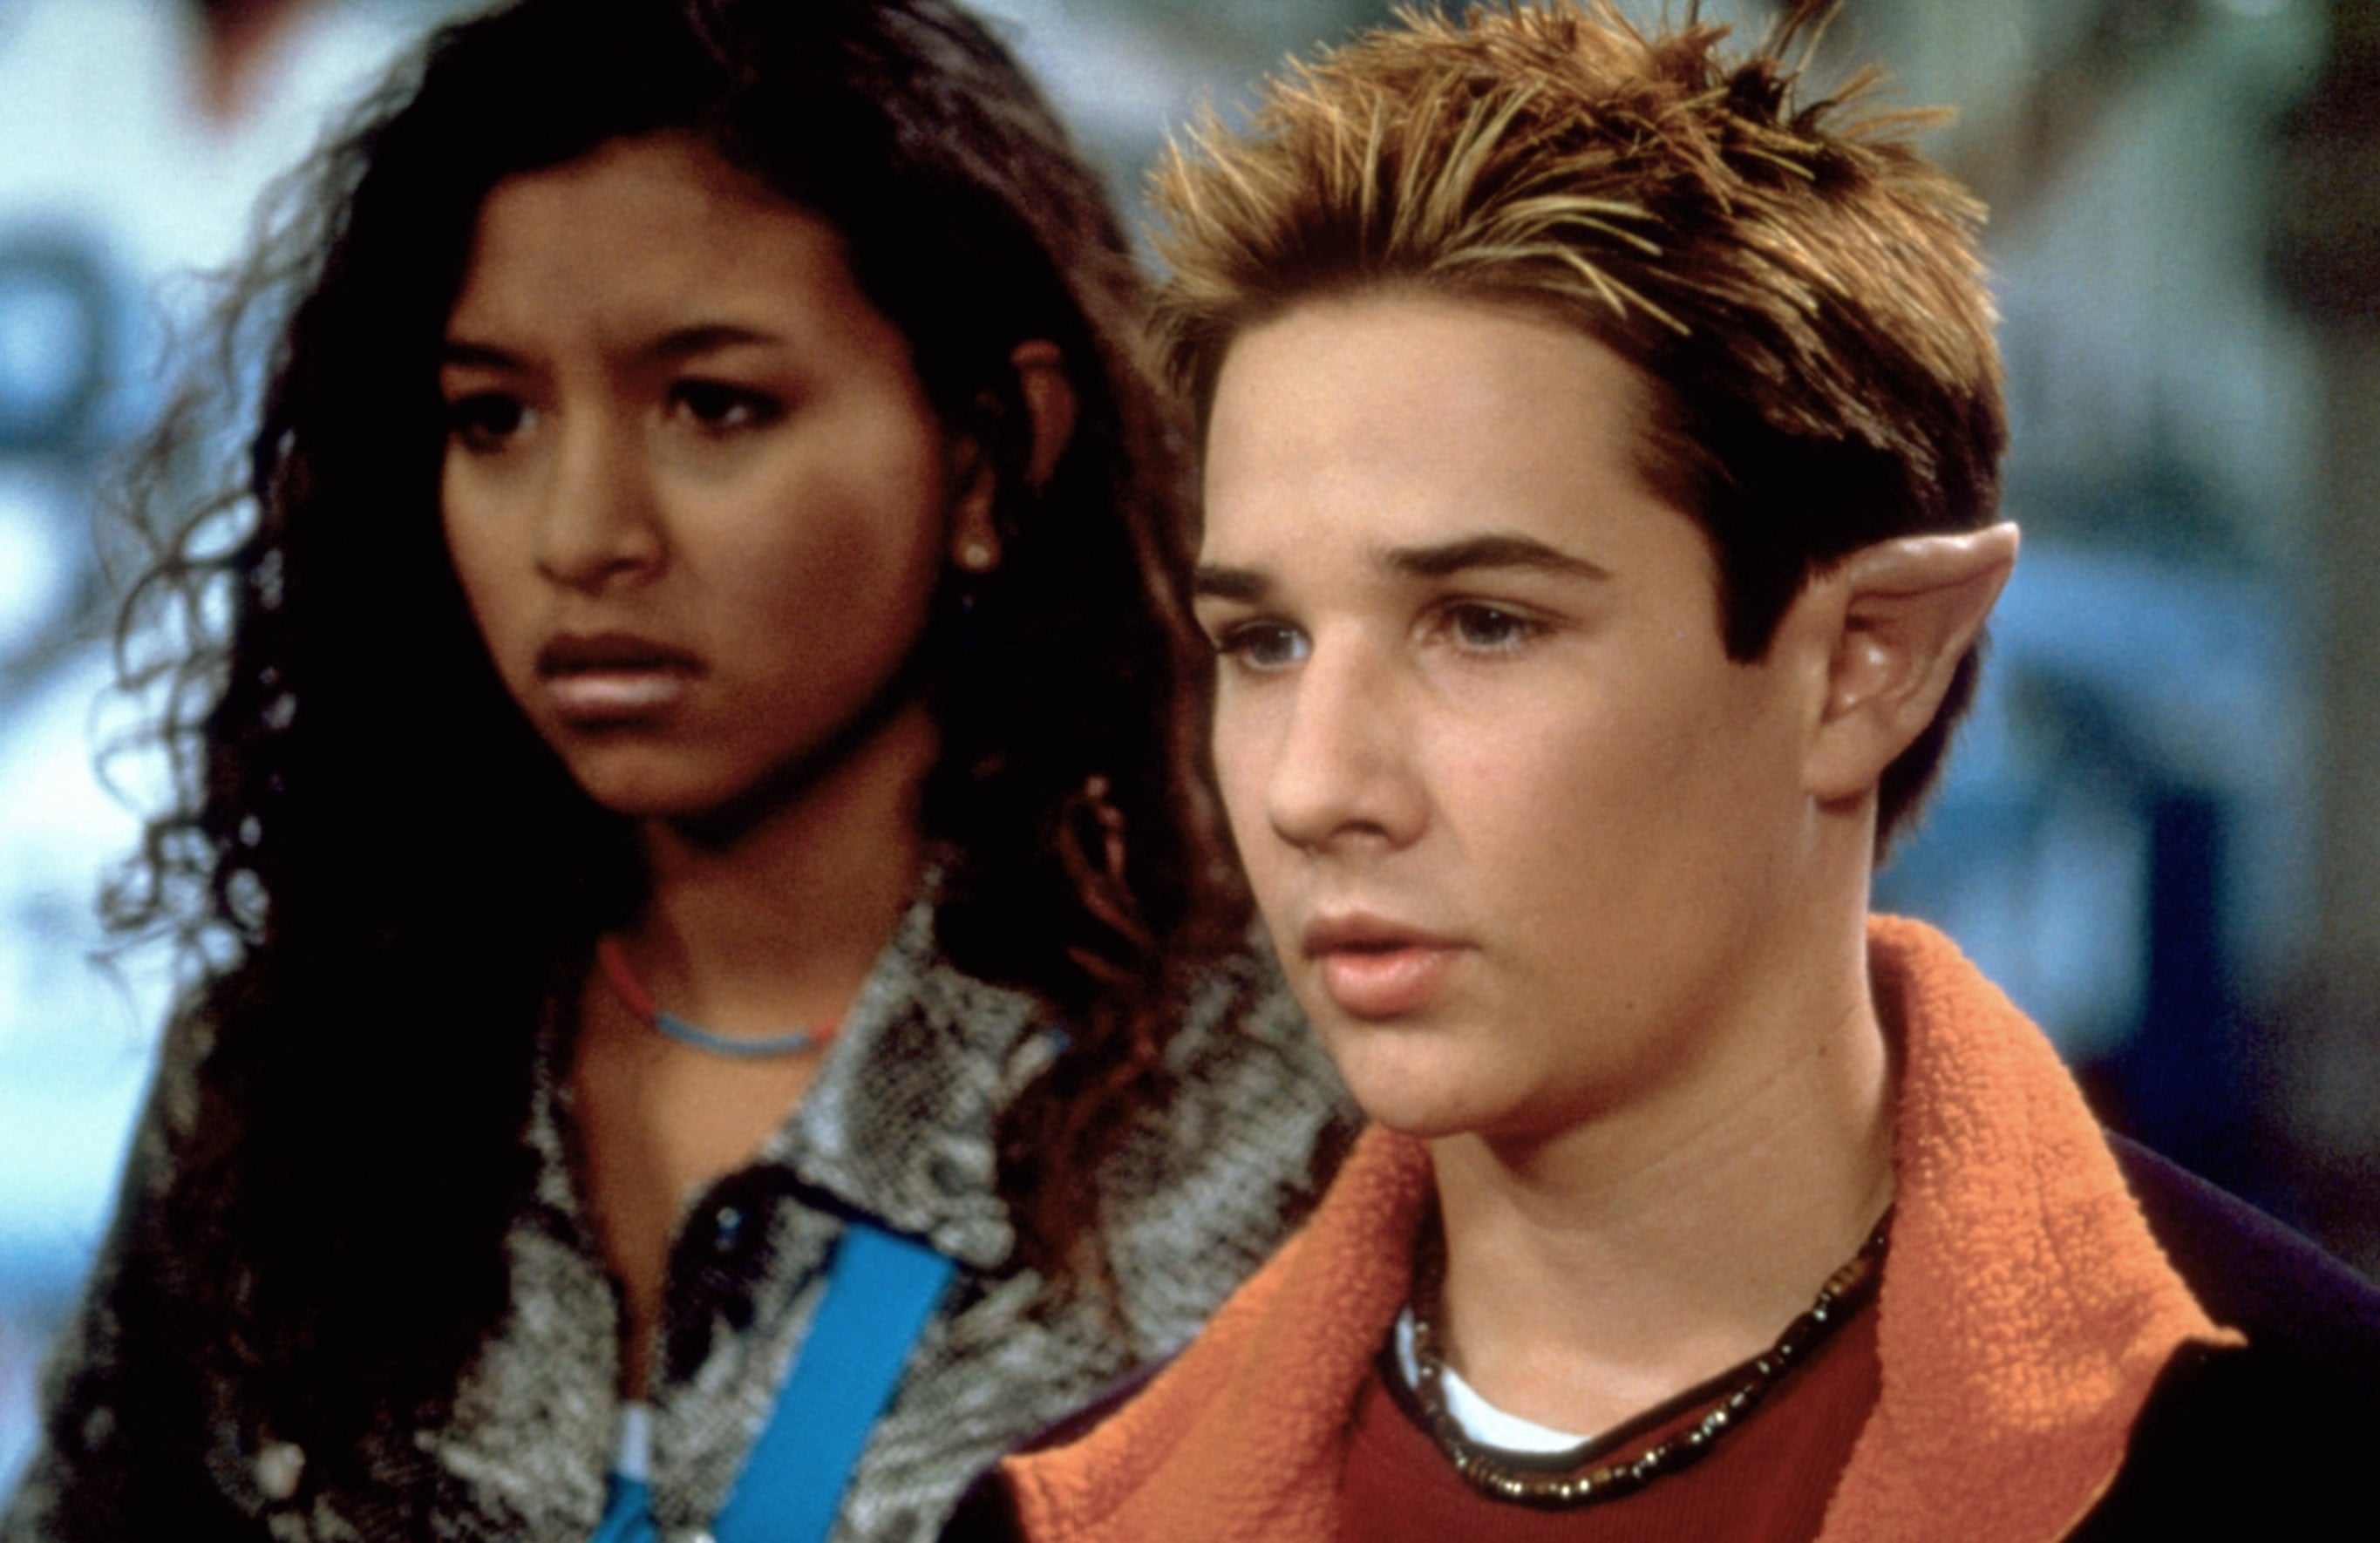 10 Celebrities You Forgot Starred in Disney Channel Original Movies